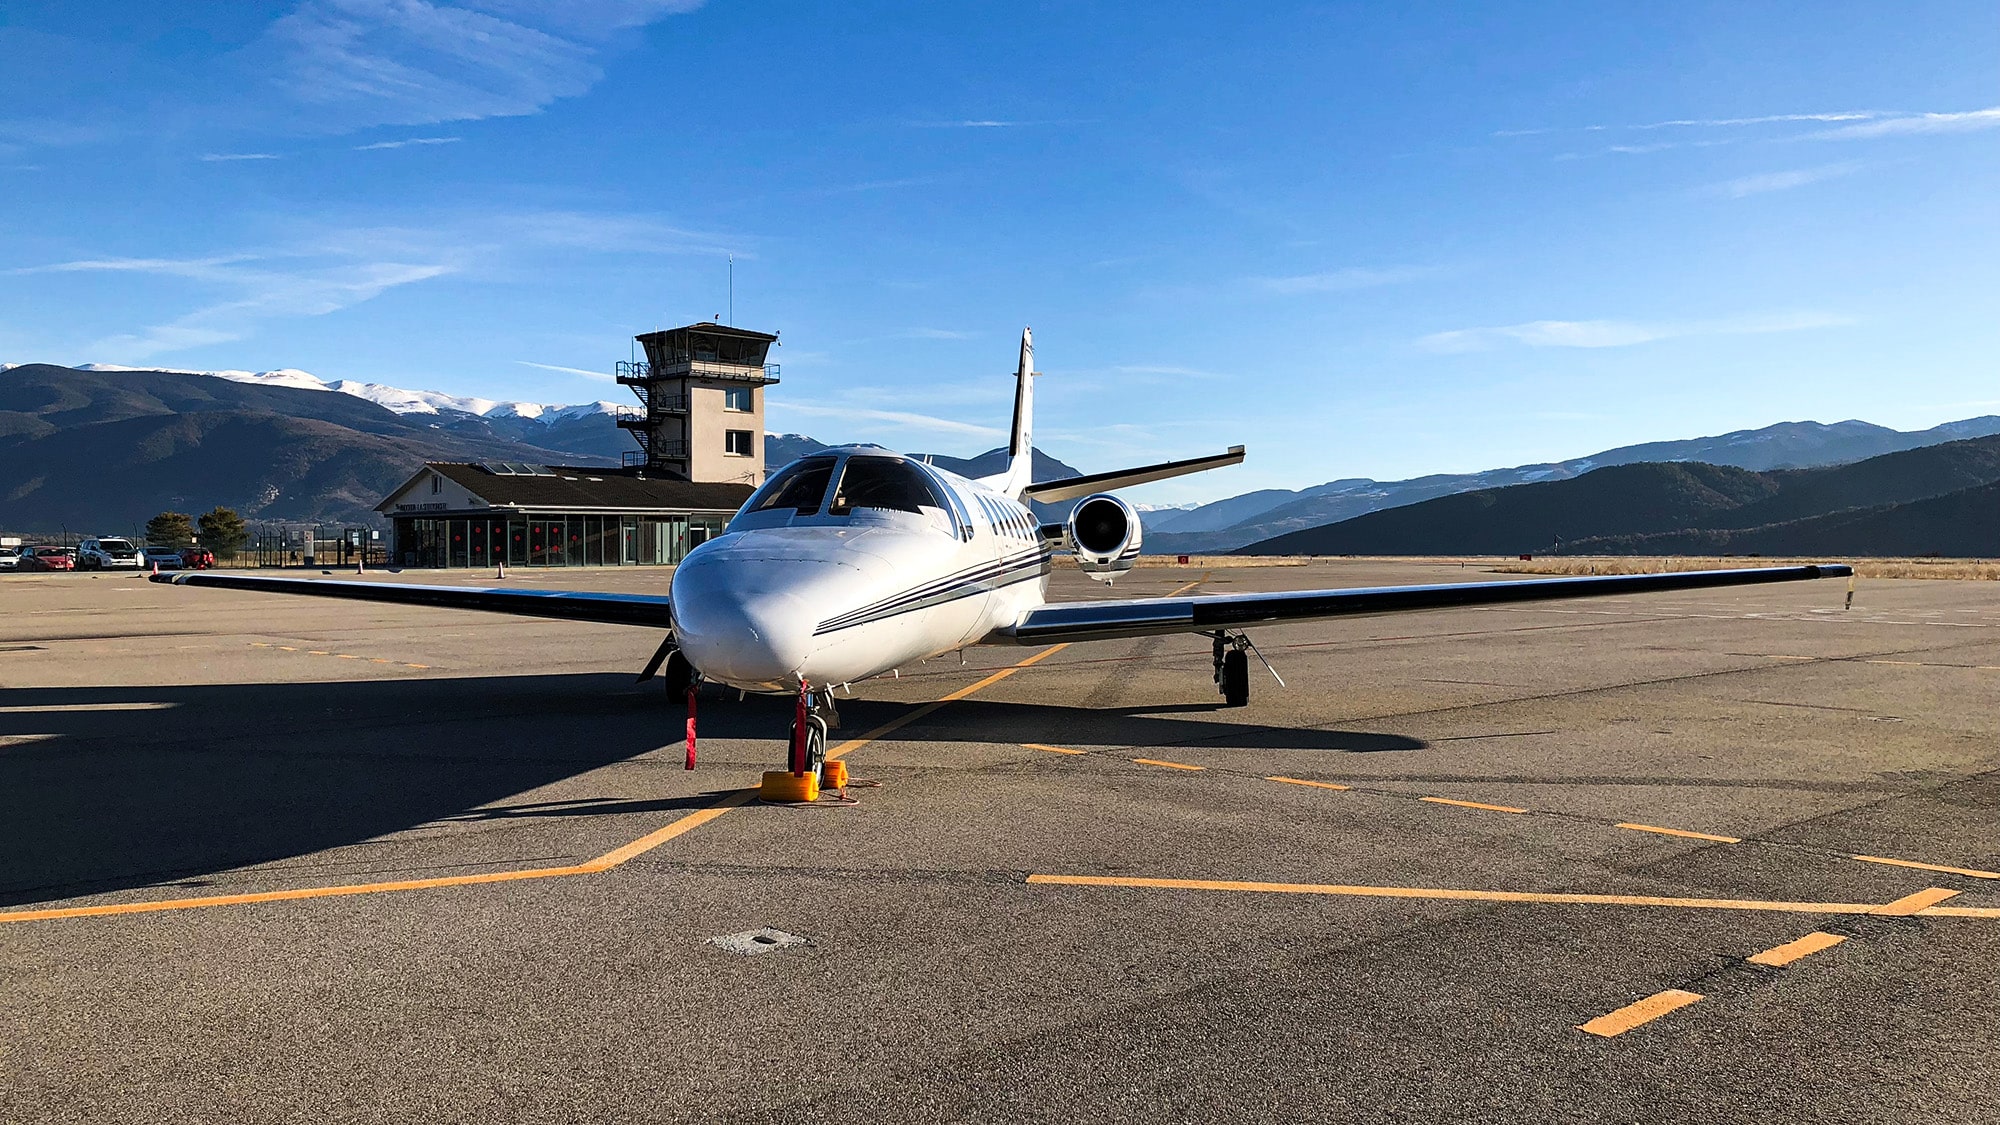 Andorra's Airport: Details on the Nearest Airport to Andorra